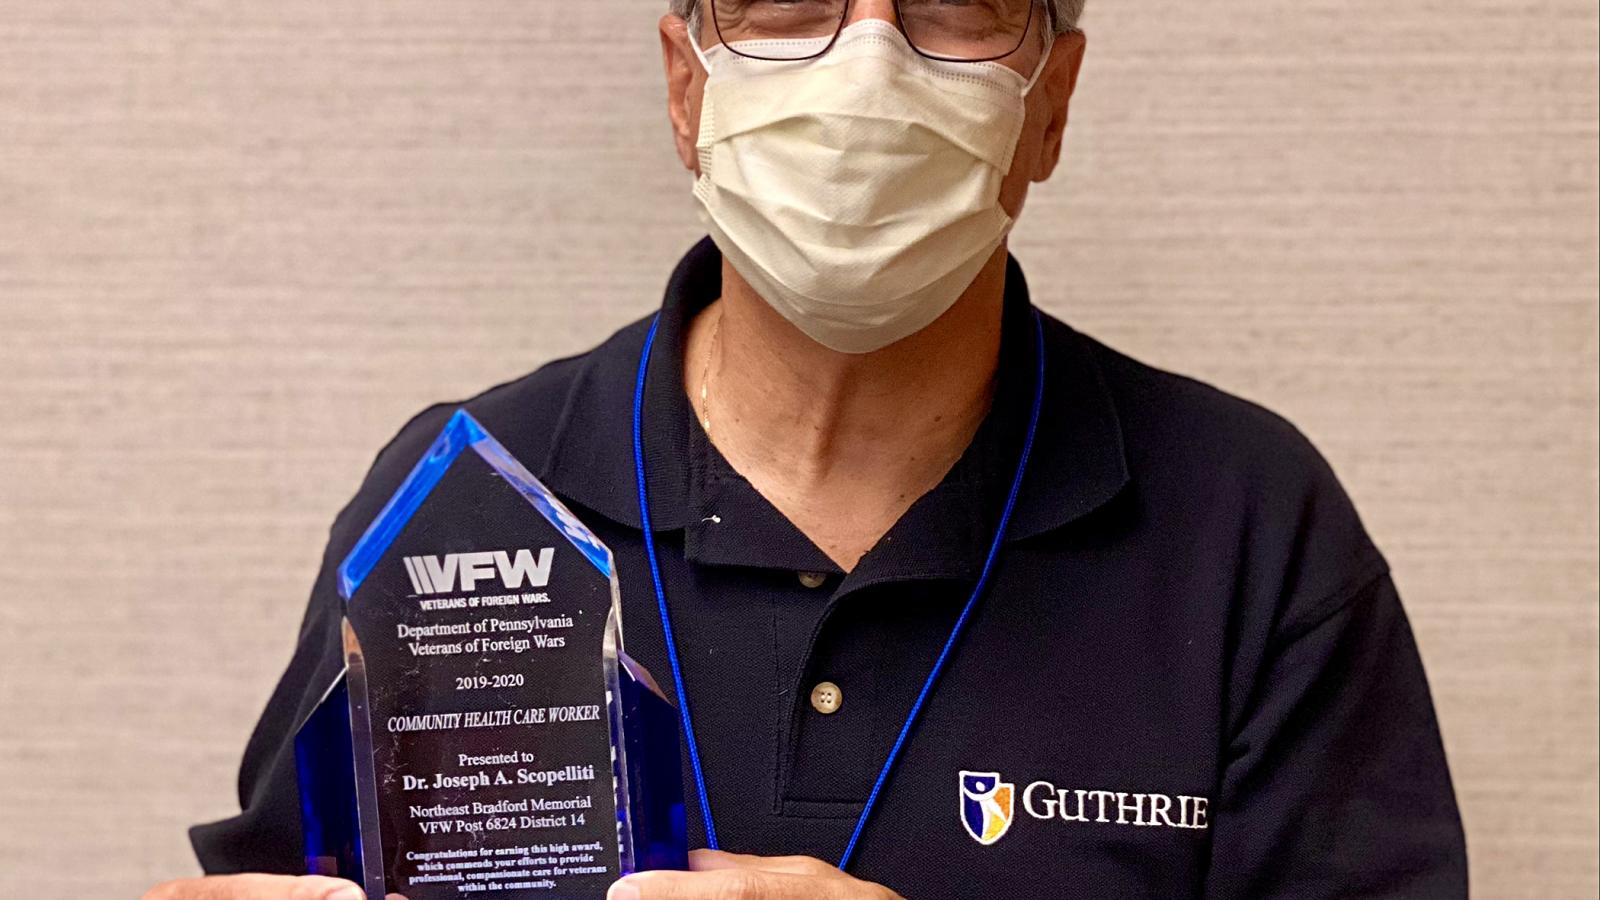 Guthrie CEO Honored with Outstanding Community Healthcare Employee of the Year Award 